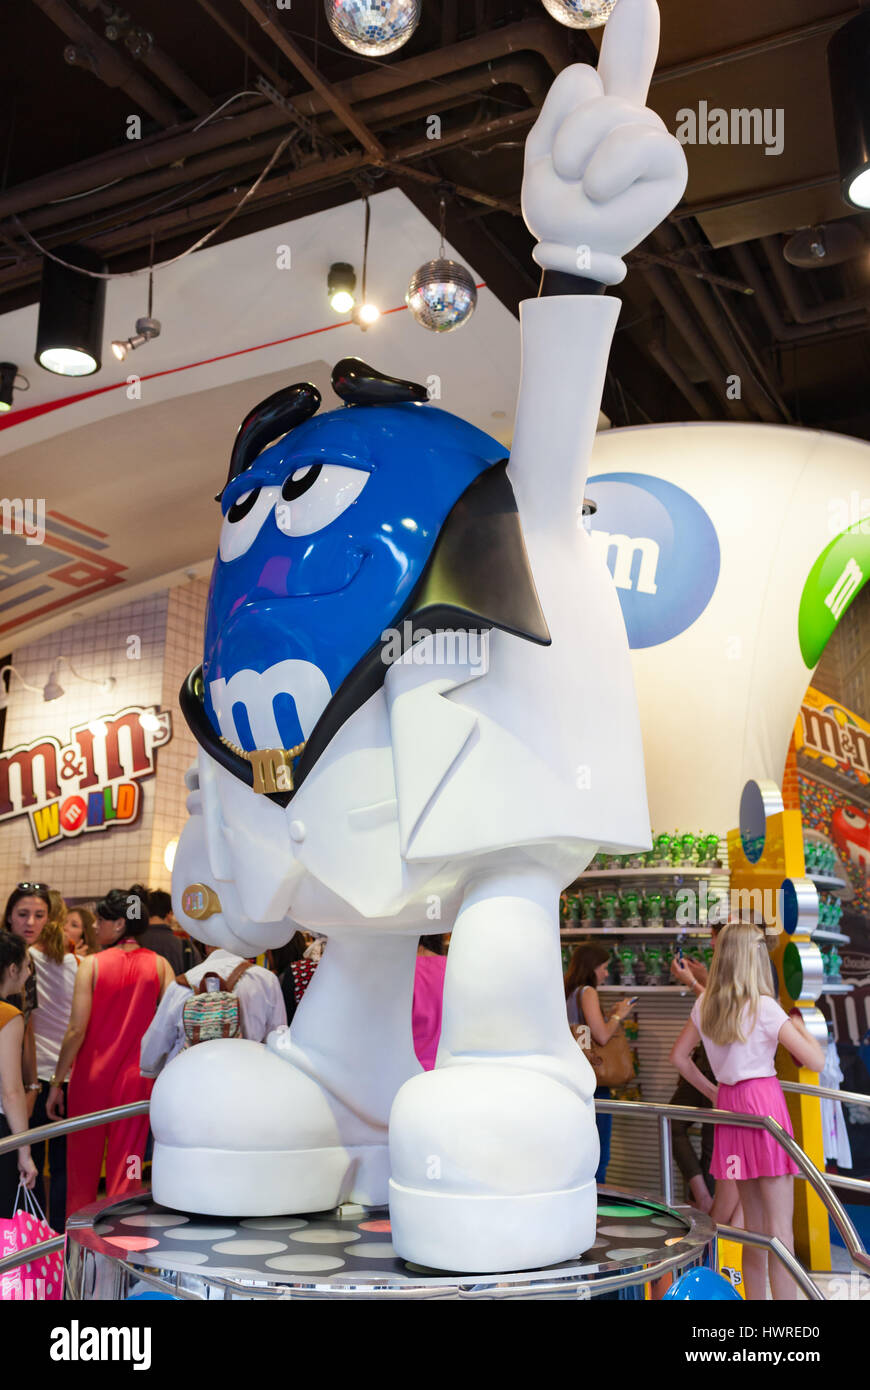 New York City, Usa - July 08, 2015: The M&M world store in Times square. M&M's strikes a pose a la John Travolta's character in the movie Saturday Nig Stock Photo